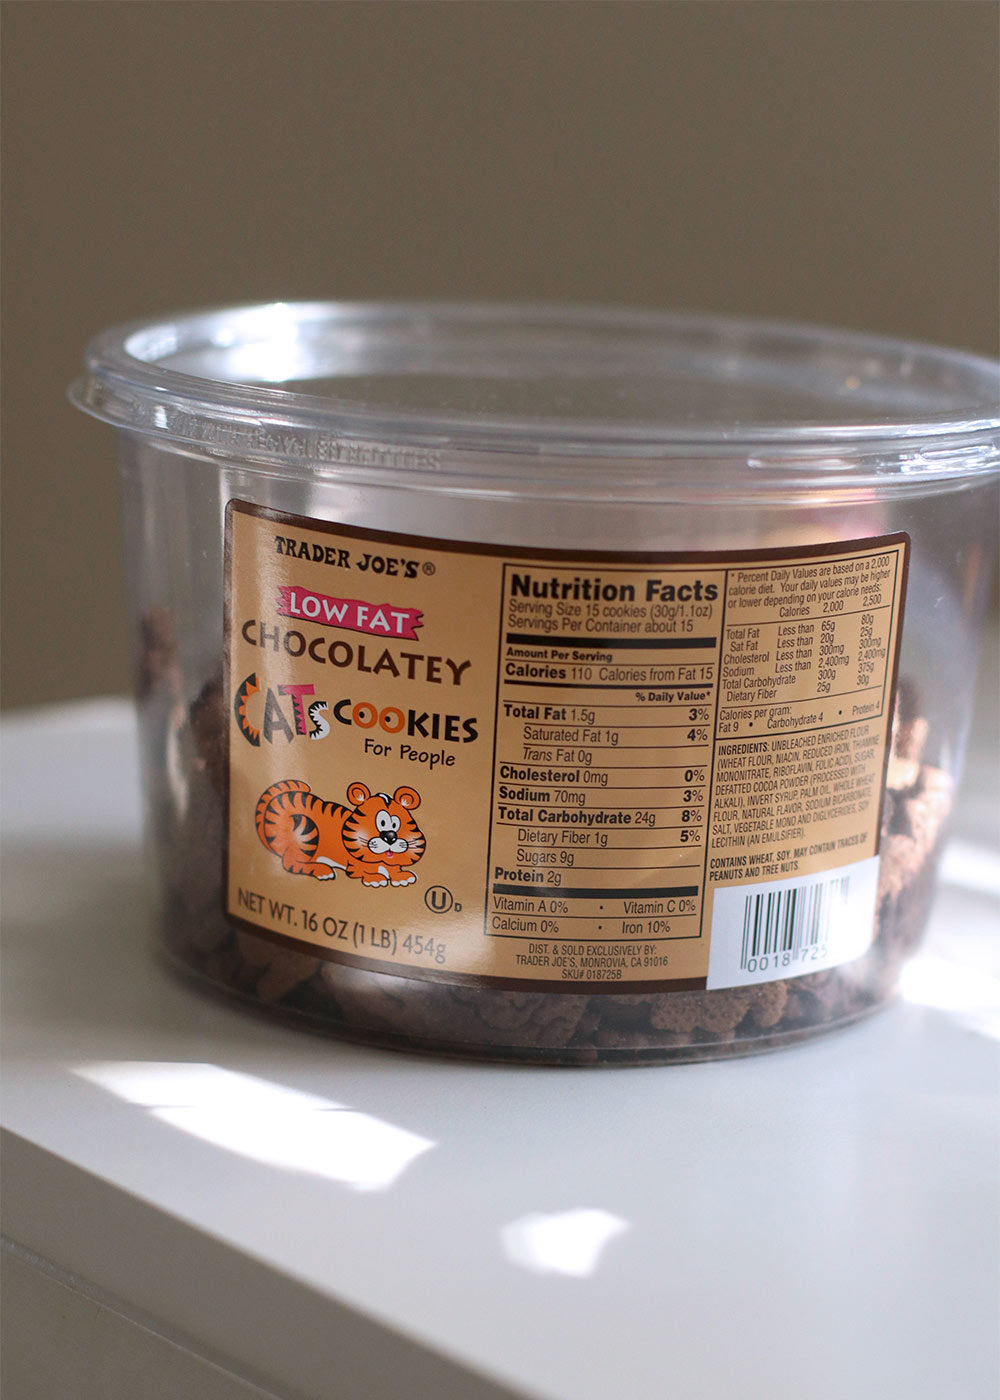 low fat chocolately cats cookies for people